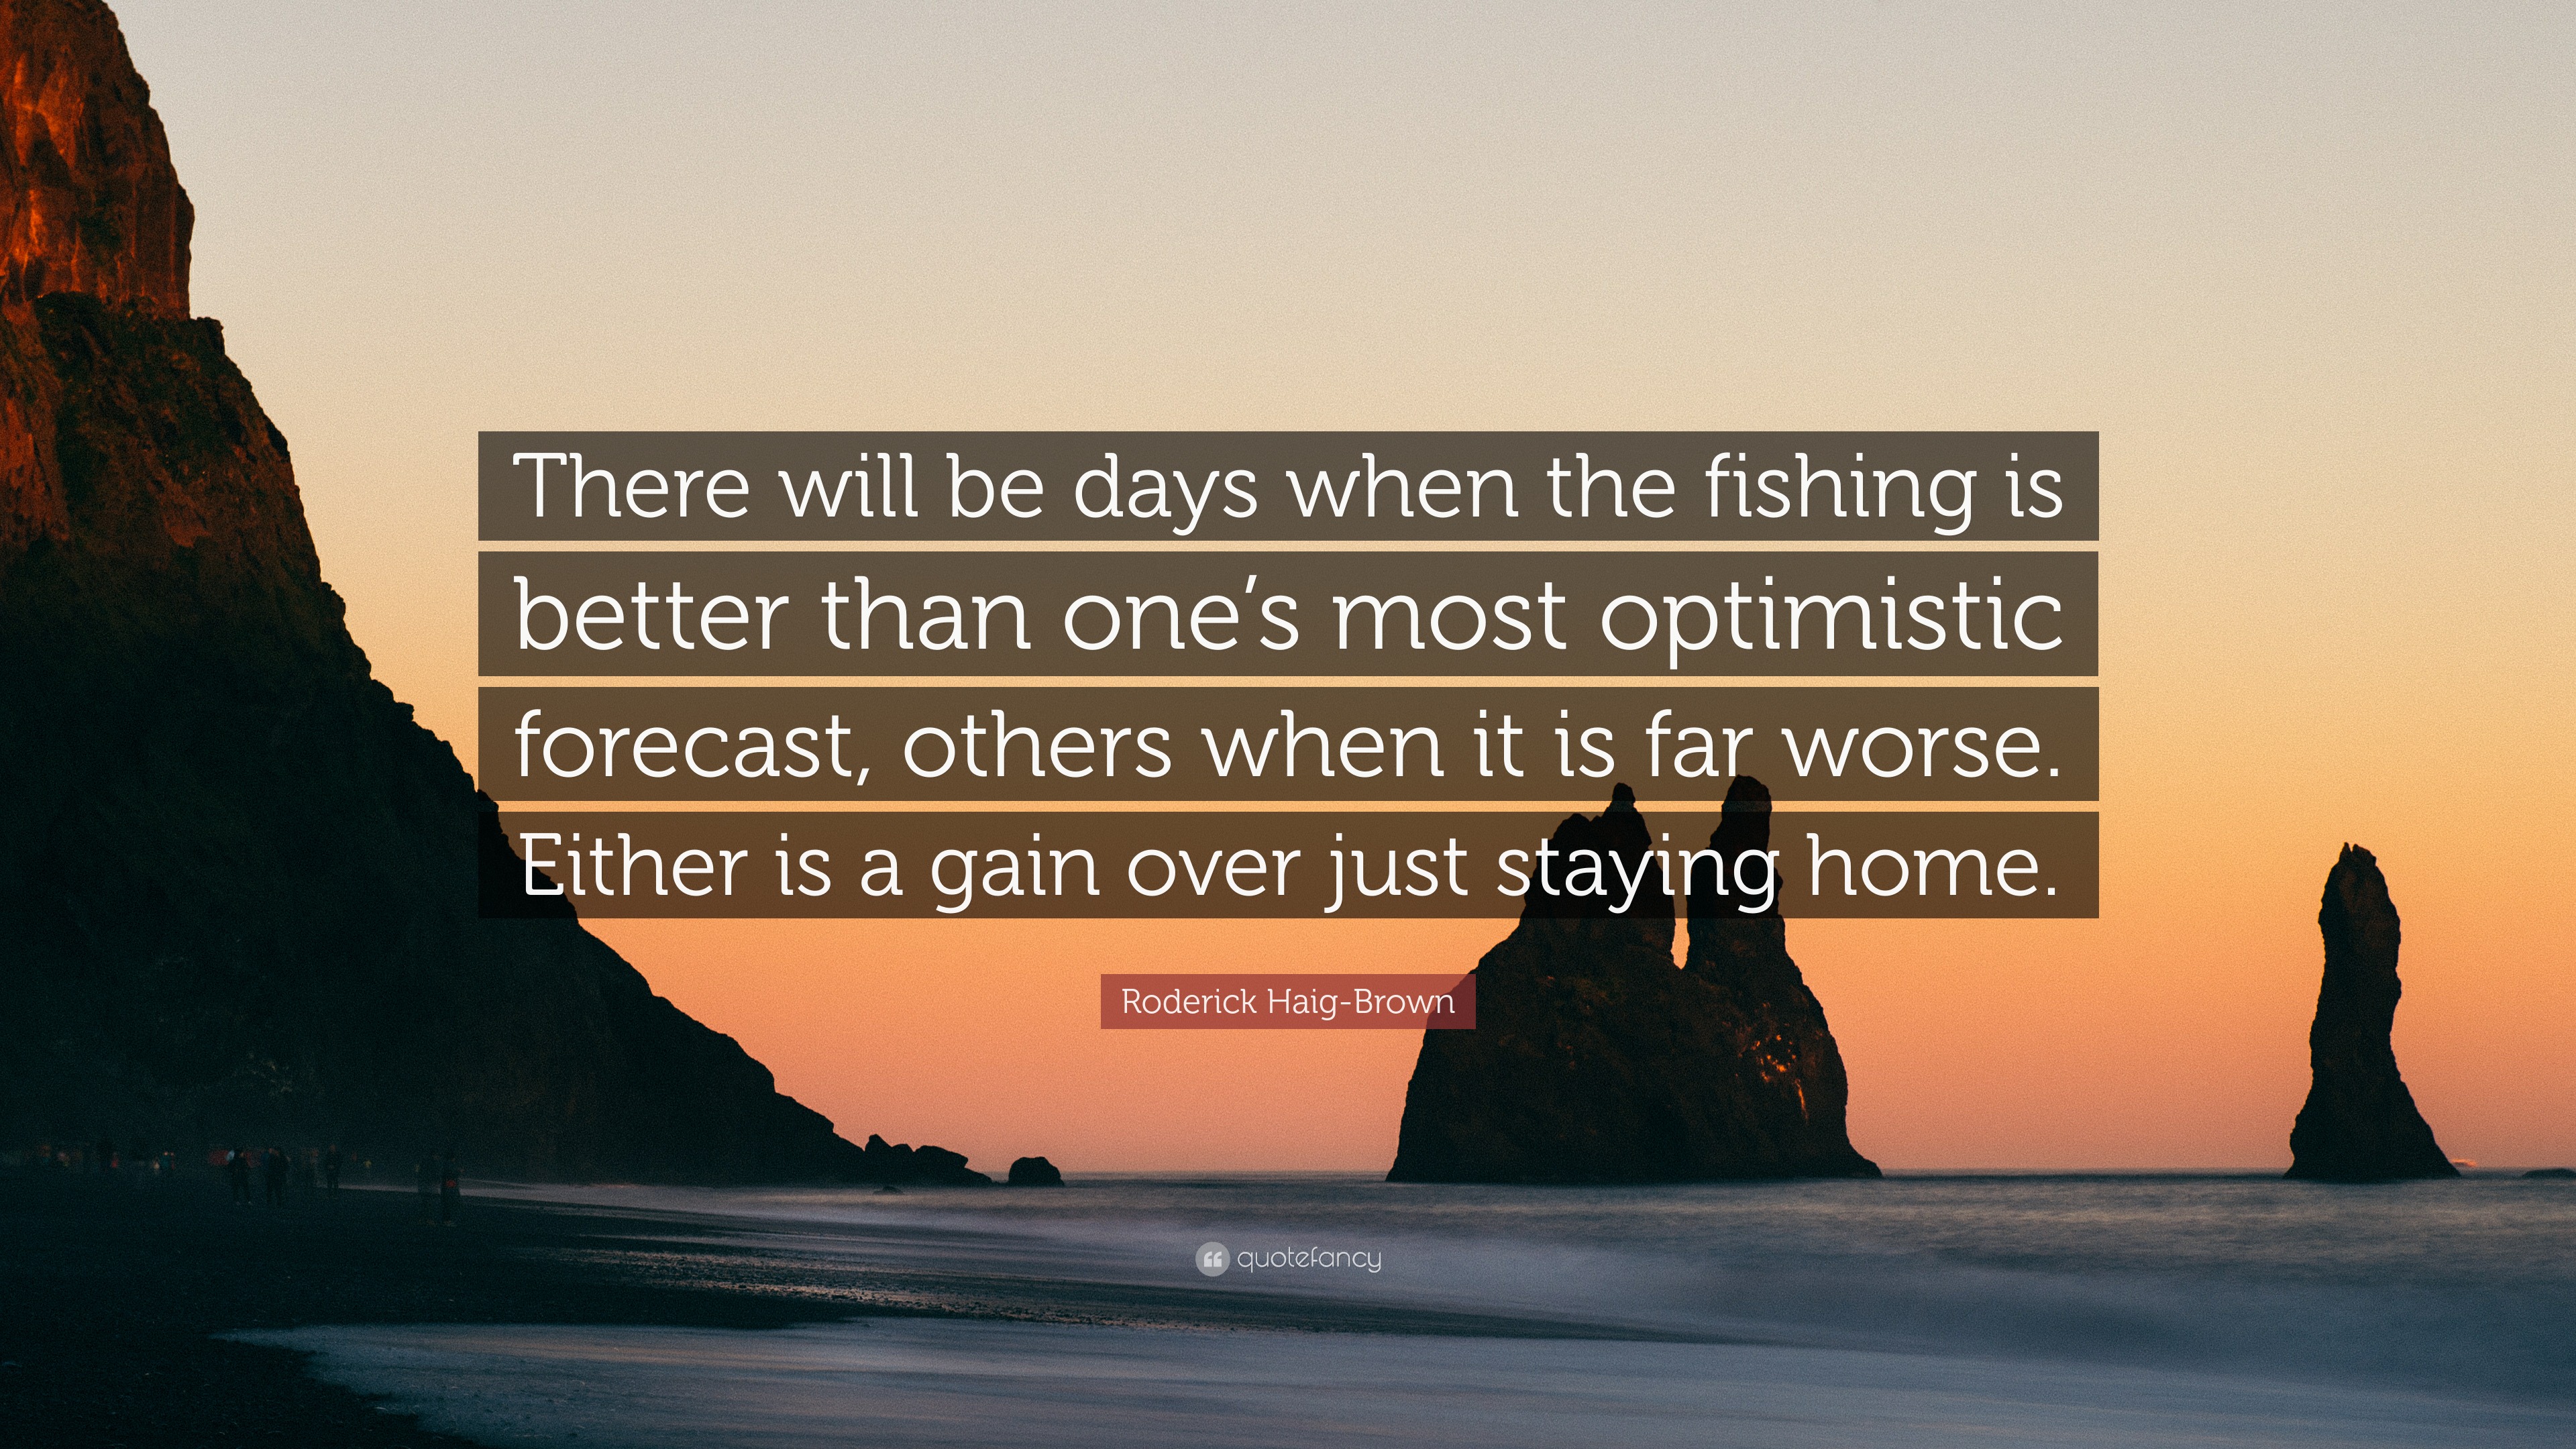 Roderick Haig-Brown Quote: “There will be days when the fishing is